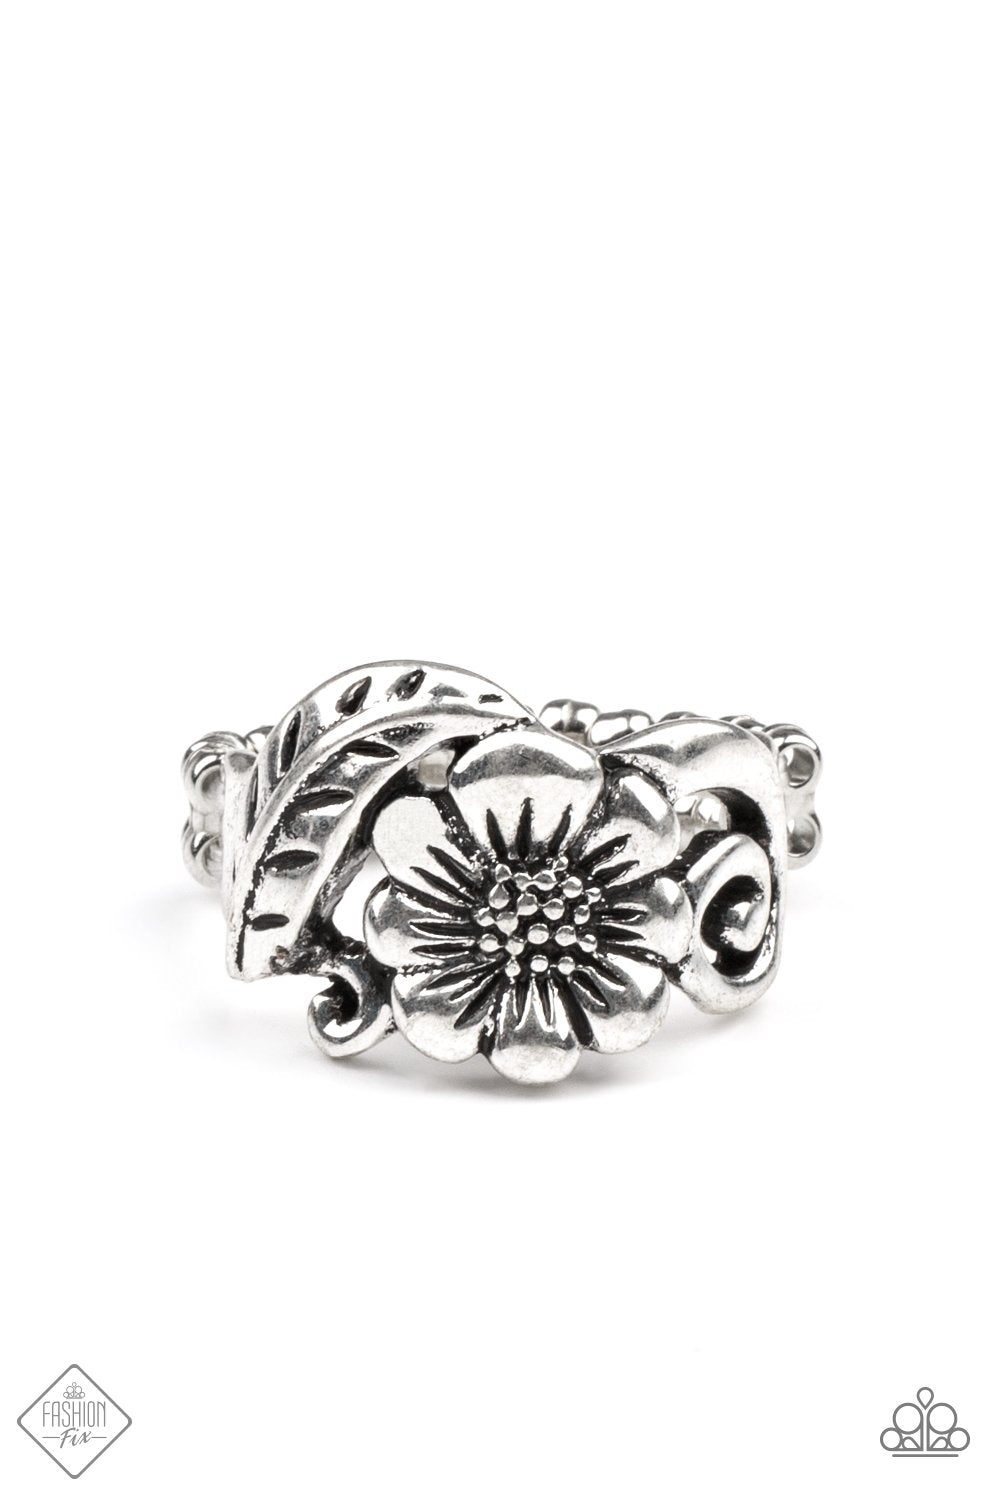 Oceanside Orchard Silver Flower Ring - Paparazzi Accessories- lightbox - CarasShop.com - $5 Jewelry by Cara Jewels